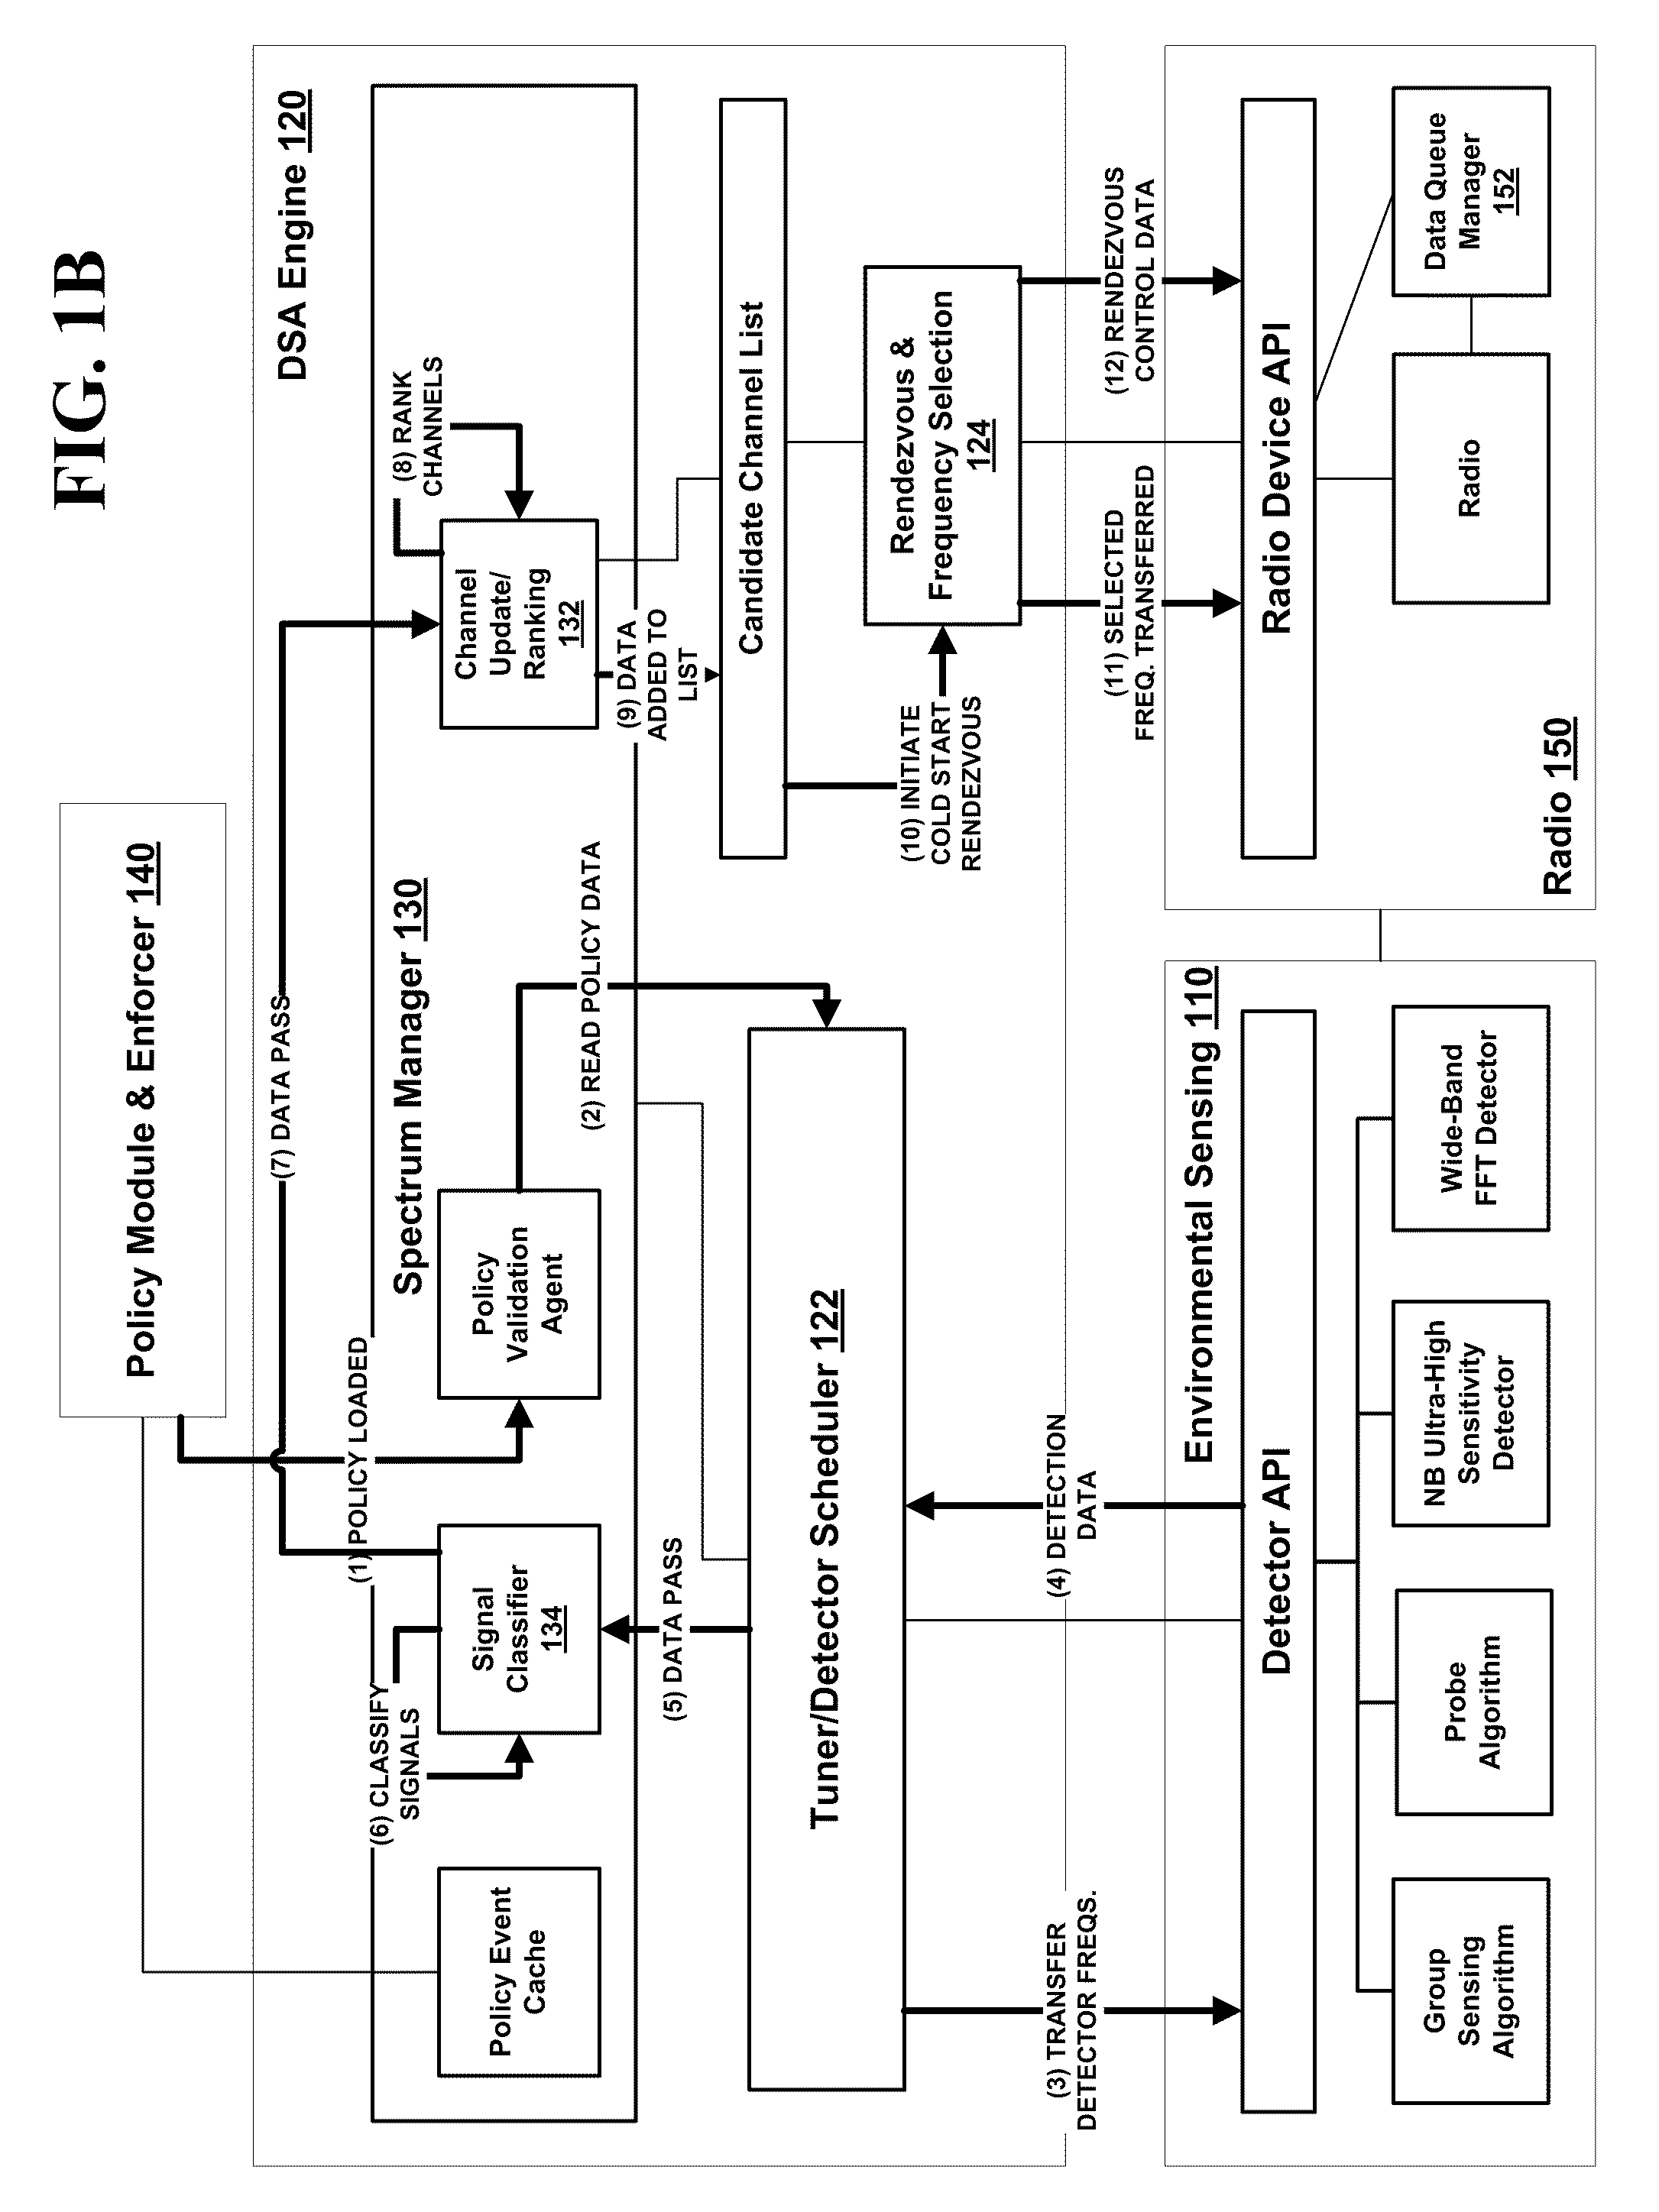 Method and System for Dynamic Spectrum Access